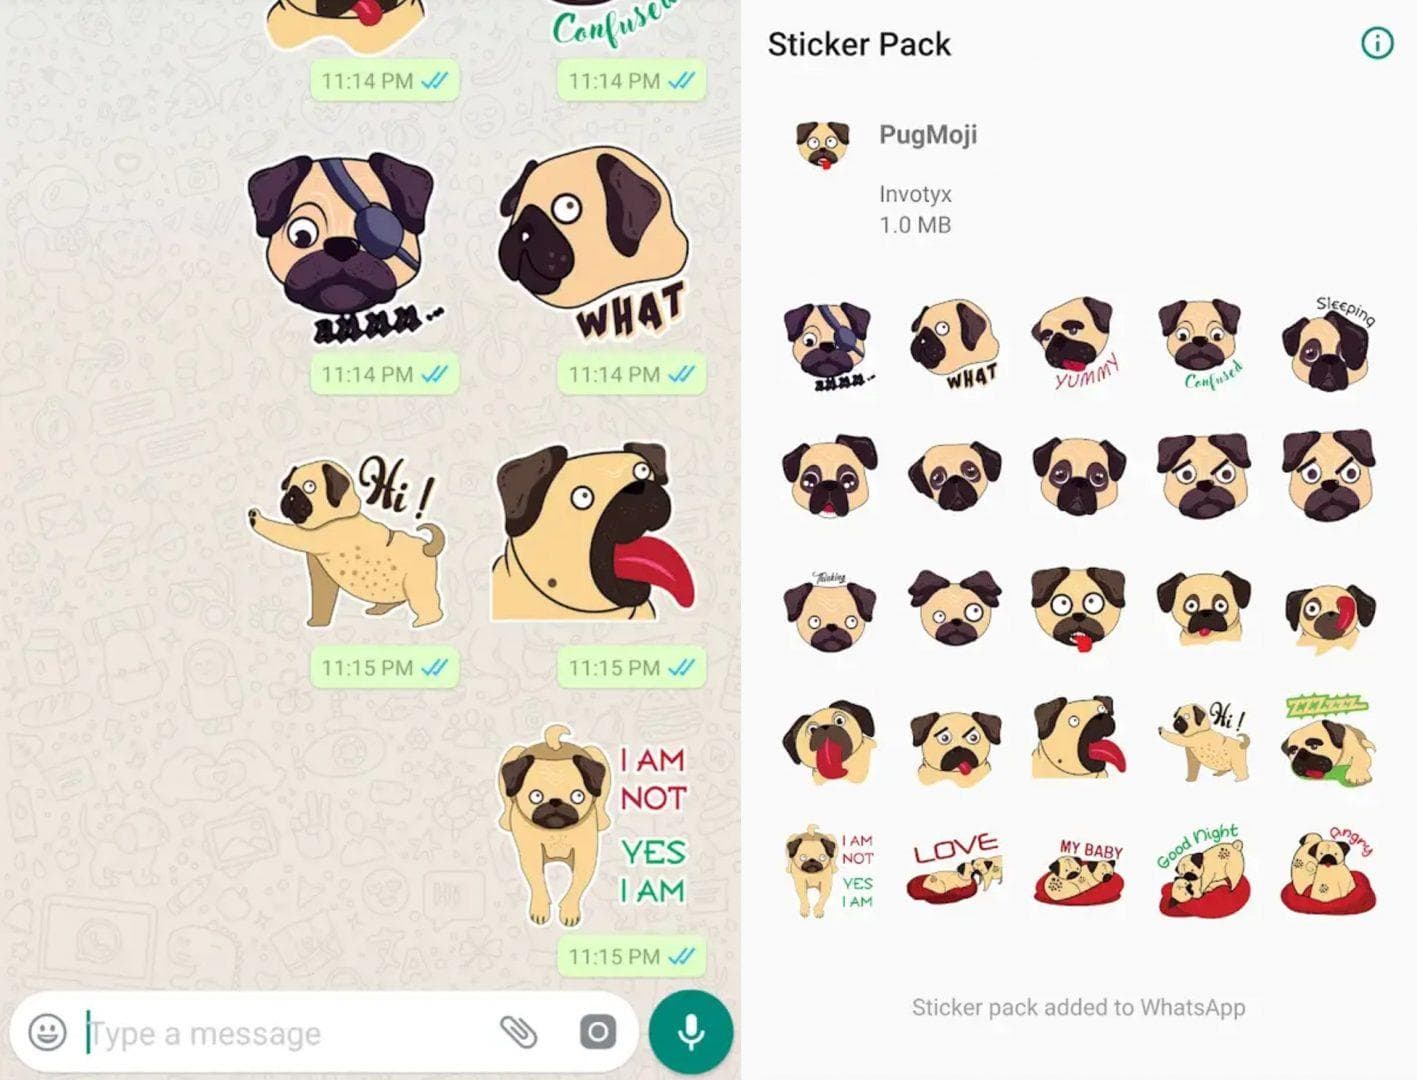 32 Amazing WhatsApp Stickers Pack You should check out